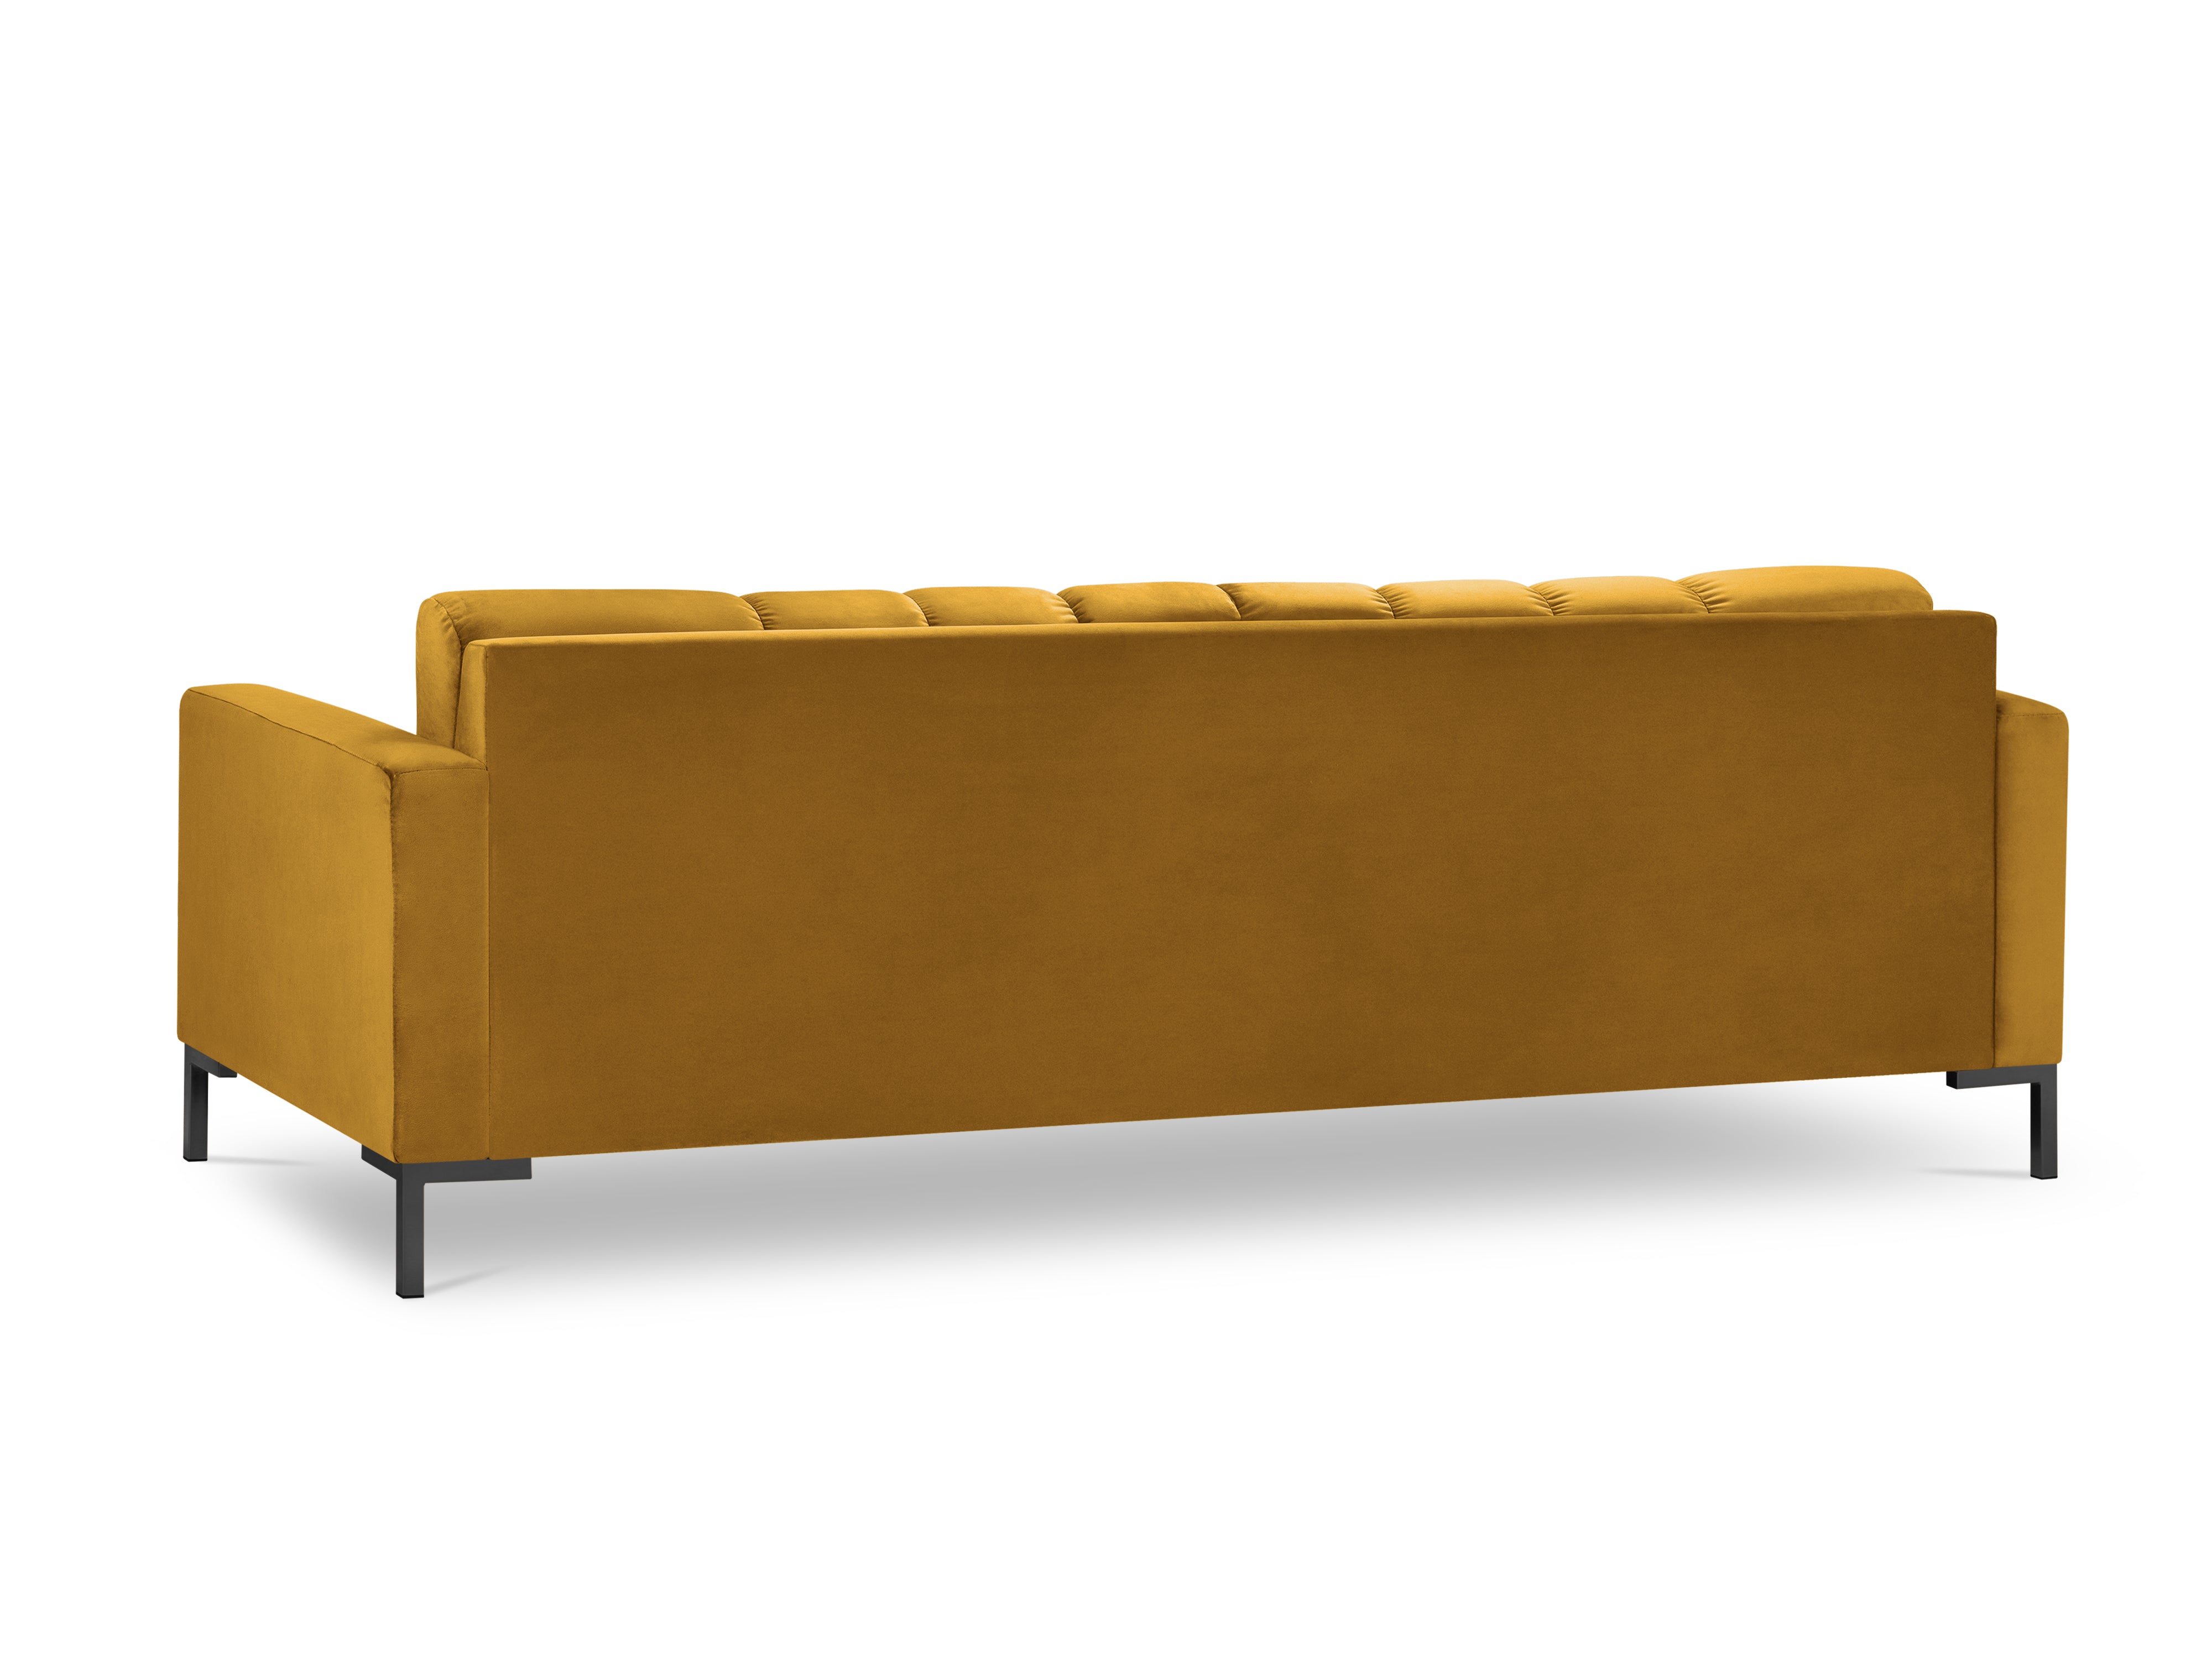 Yellow sofa with a black base